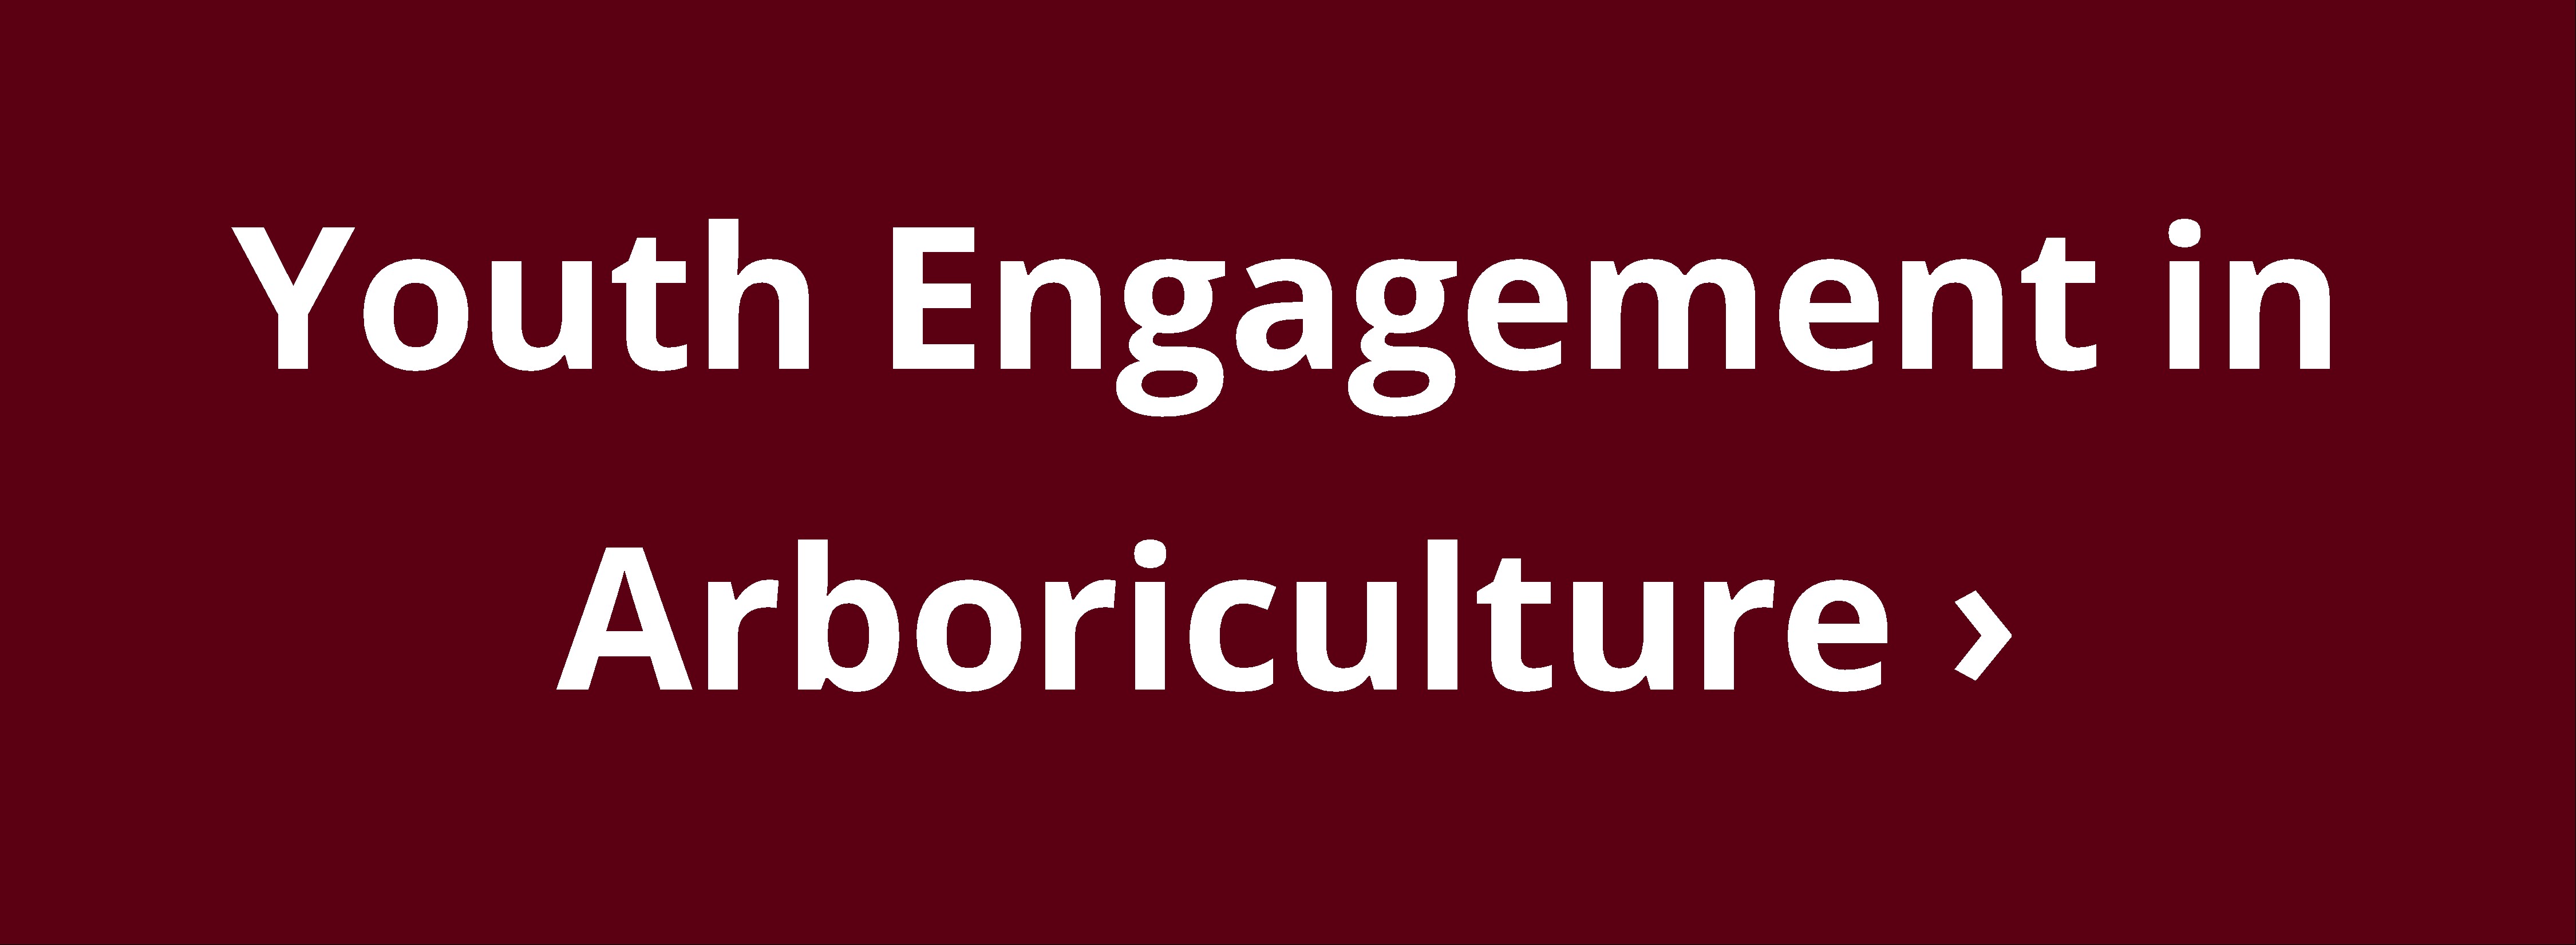 Youth engagement in arboriculture